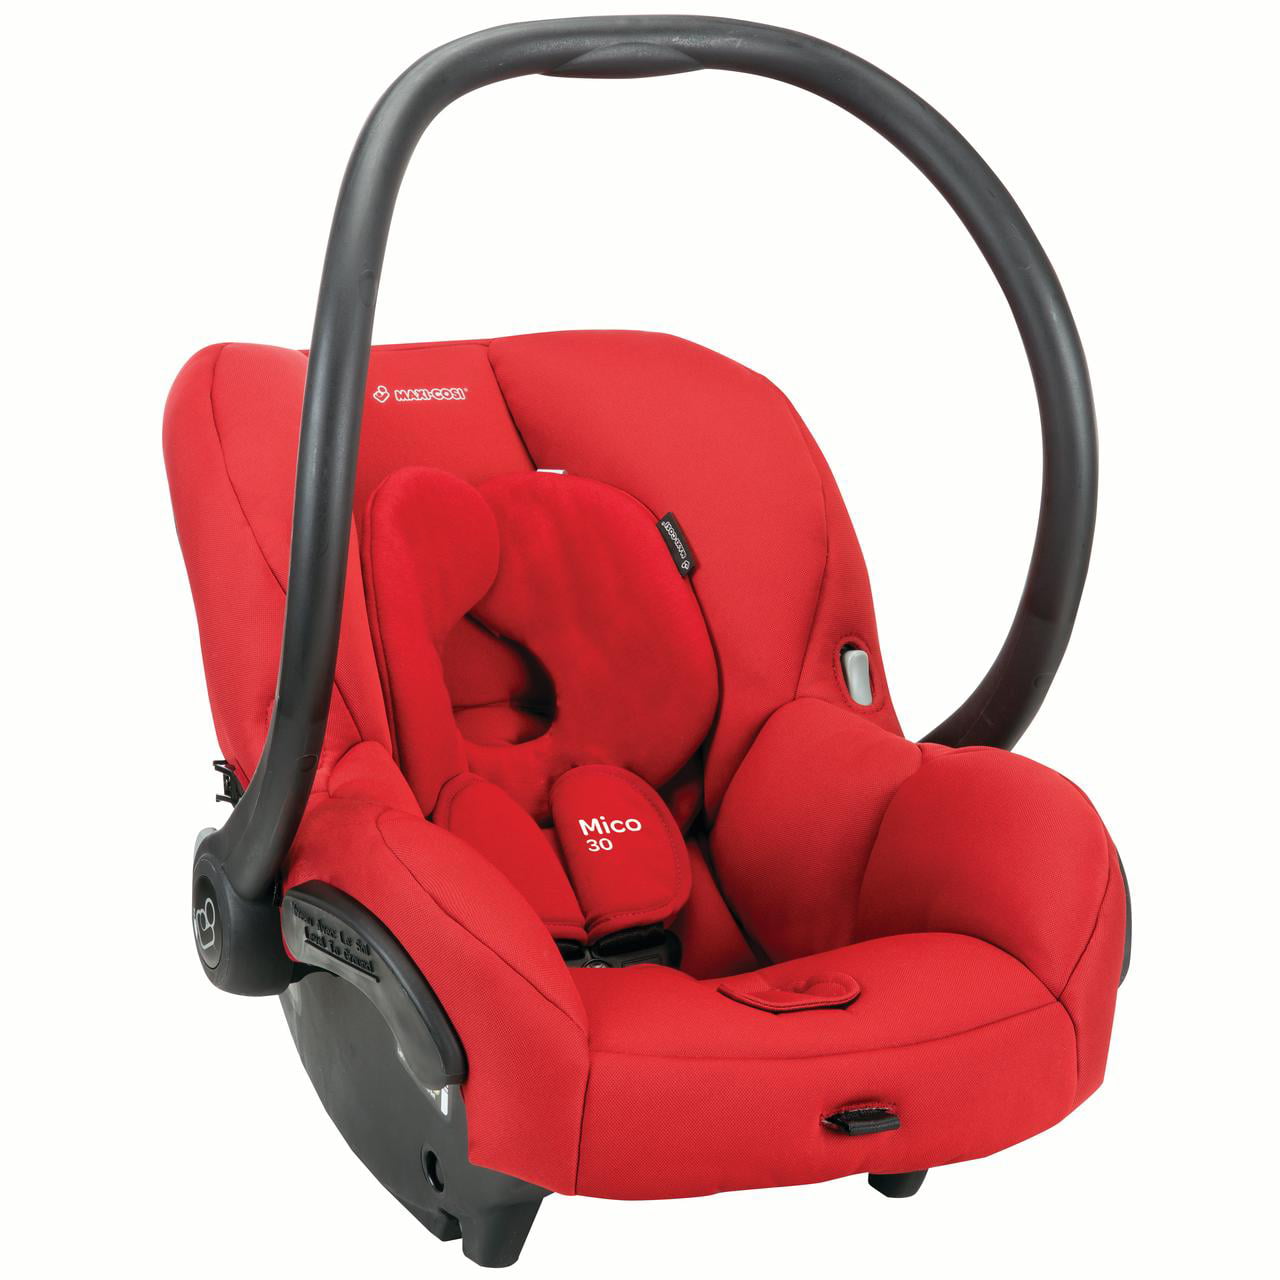 Maxi-Cosi Mico Infant Car Seat with Base, Red Rumor - Walmart.com